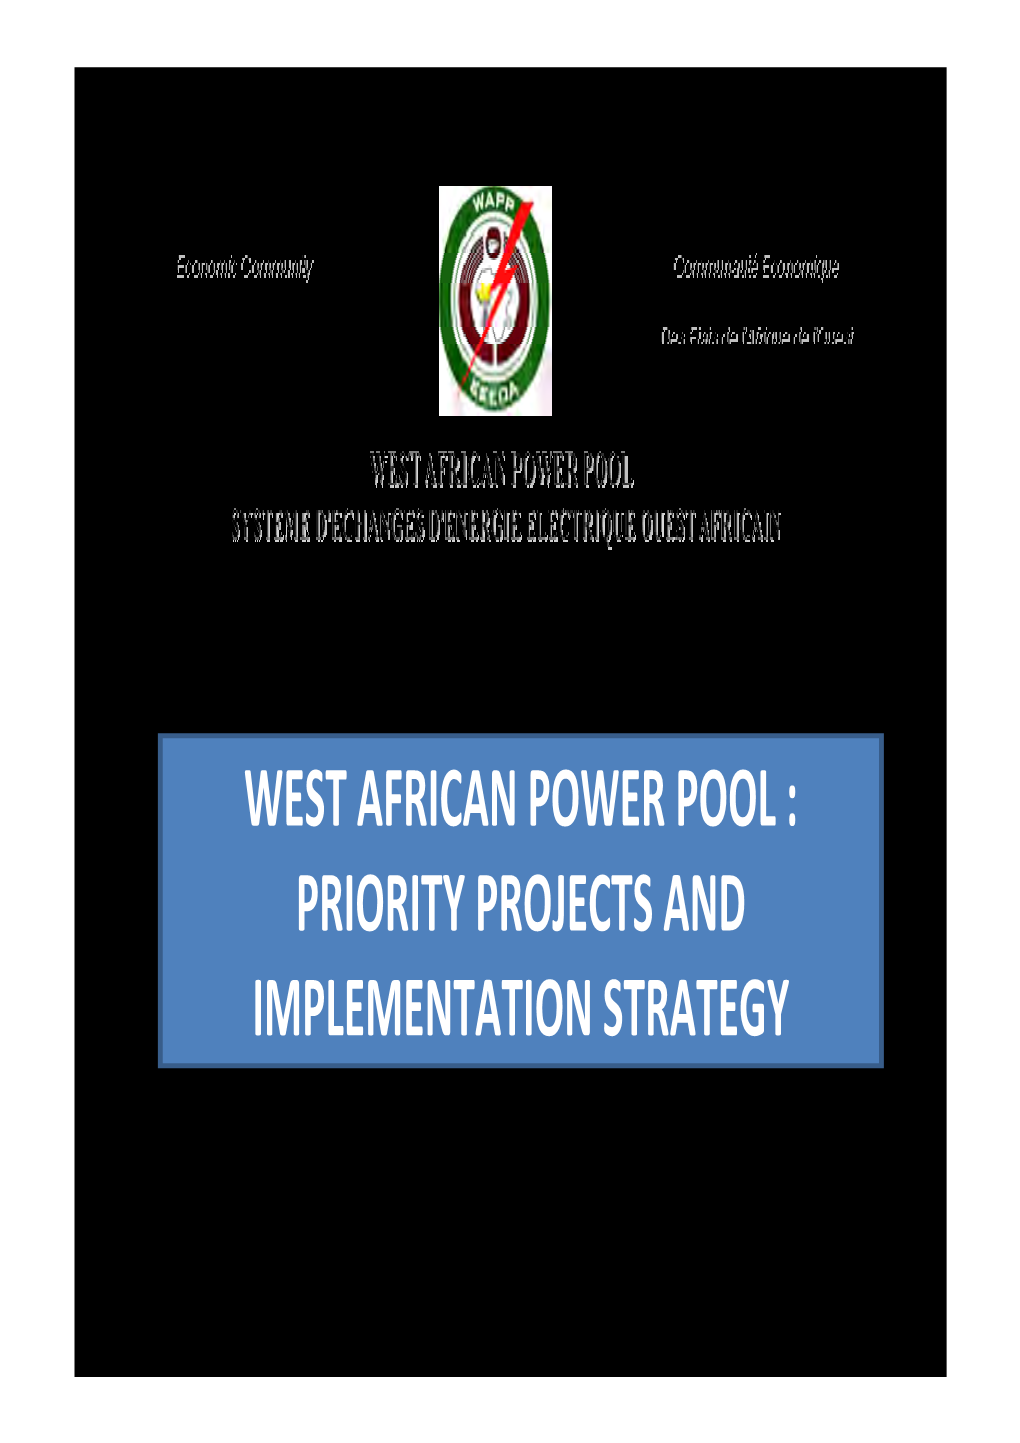 WEST AFRICAN POWER POOL : PRIORITY PROJECTS and IMPLEMENTATION STRATEGY Outline of Presentation